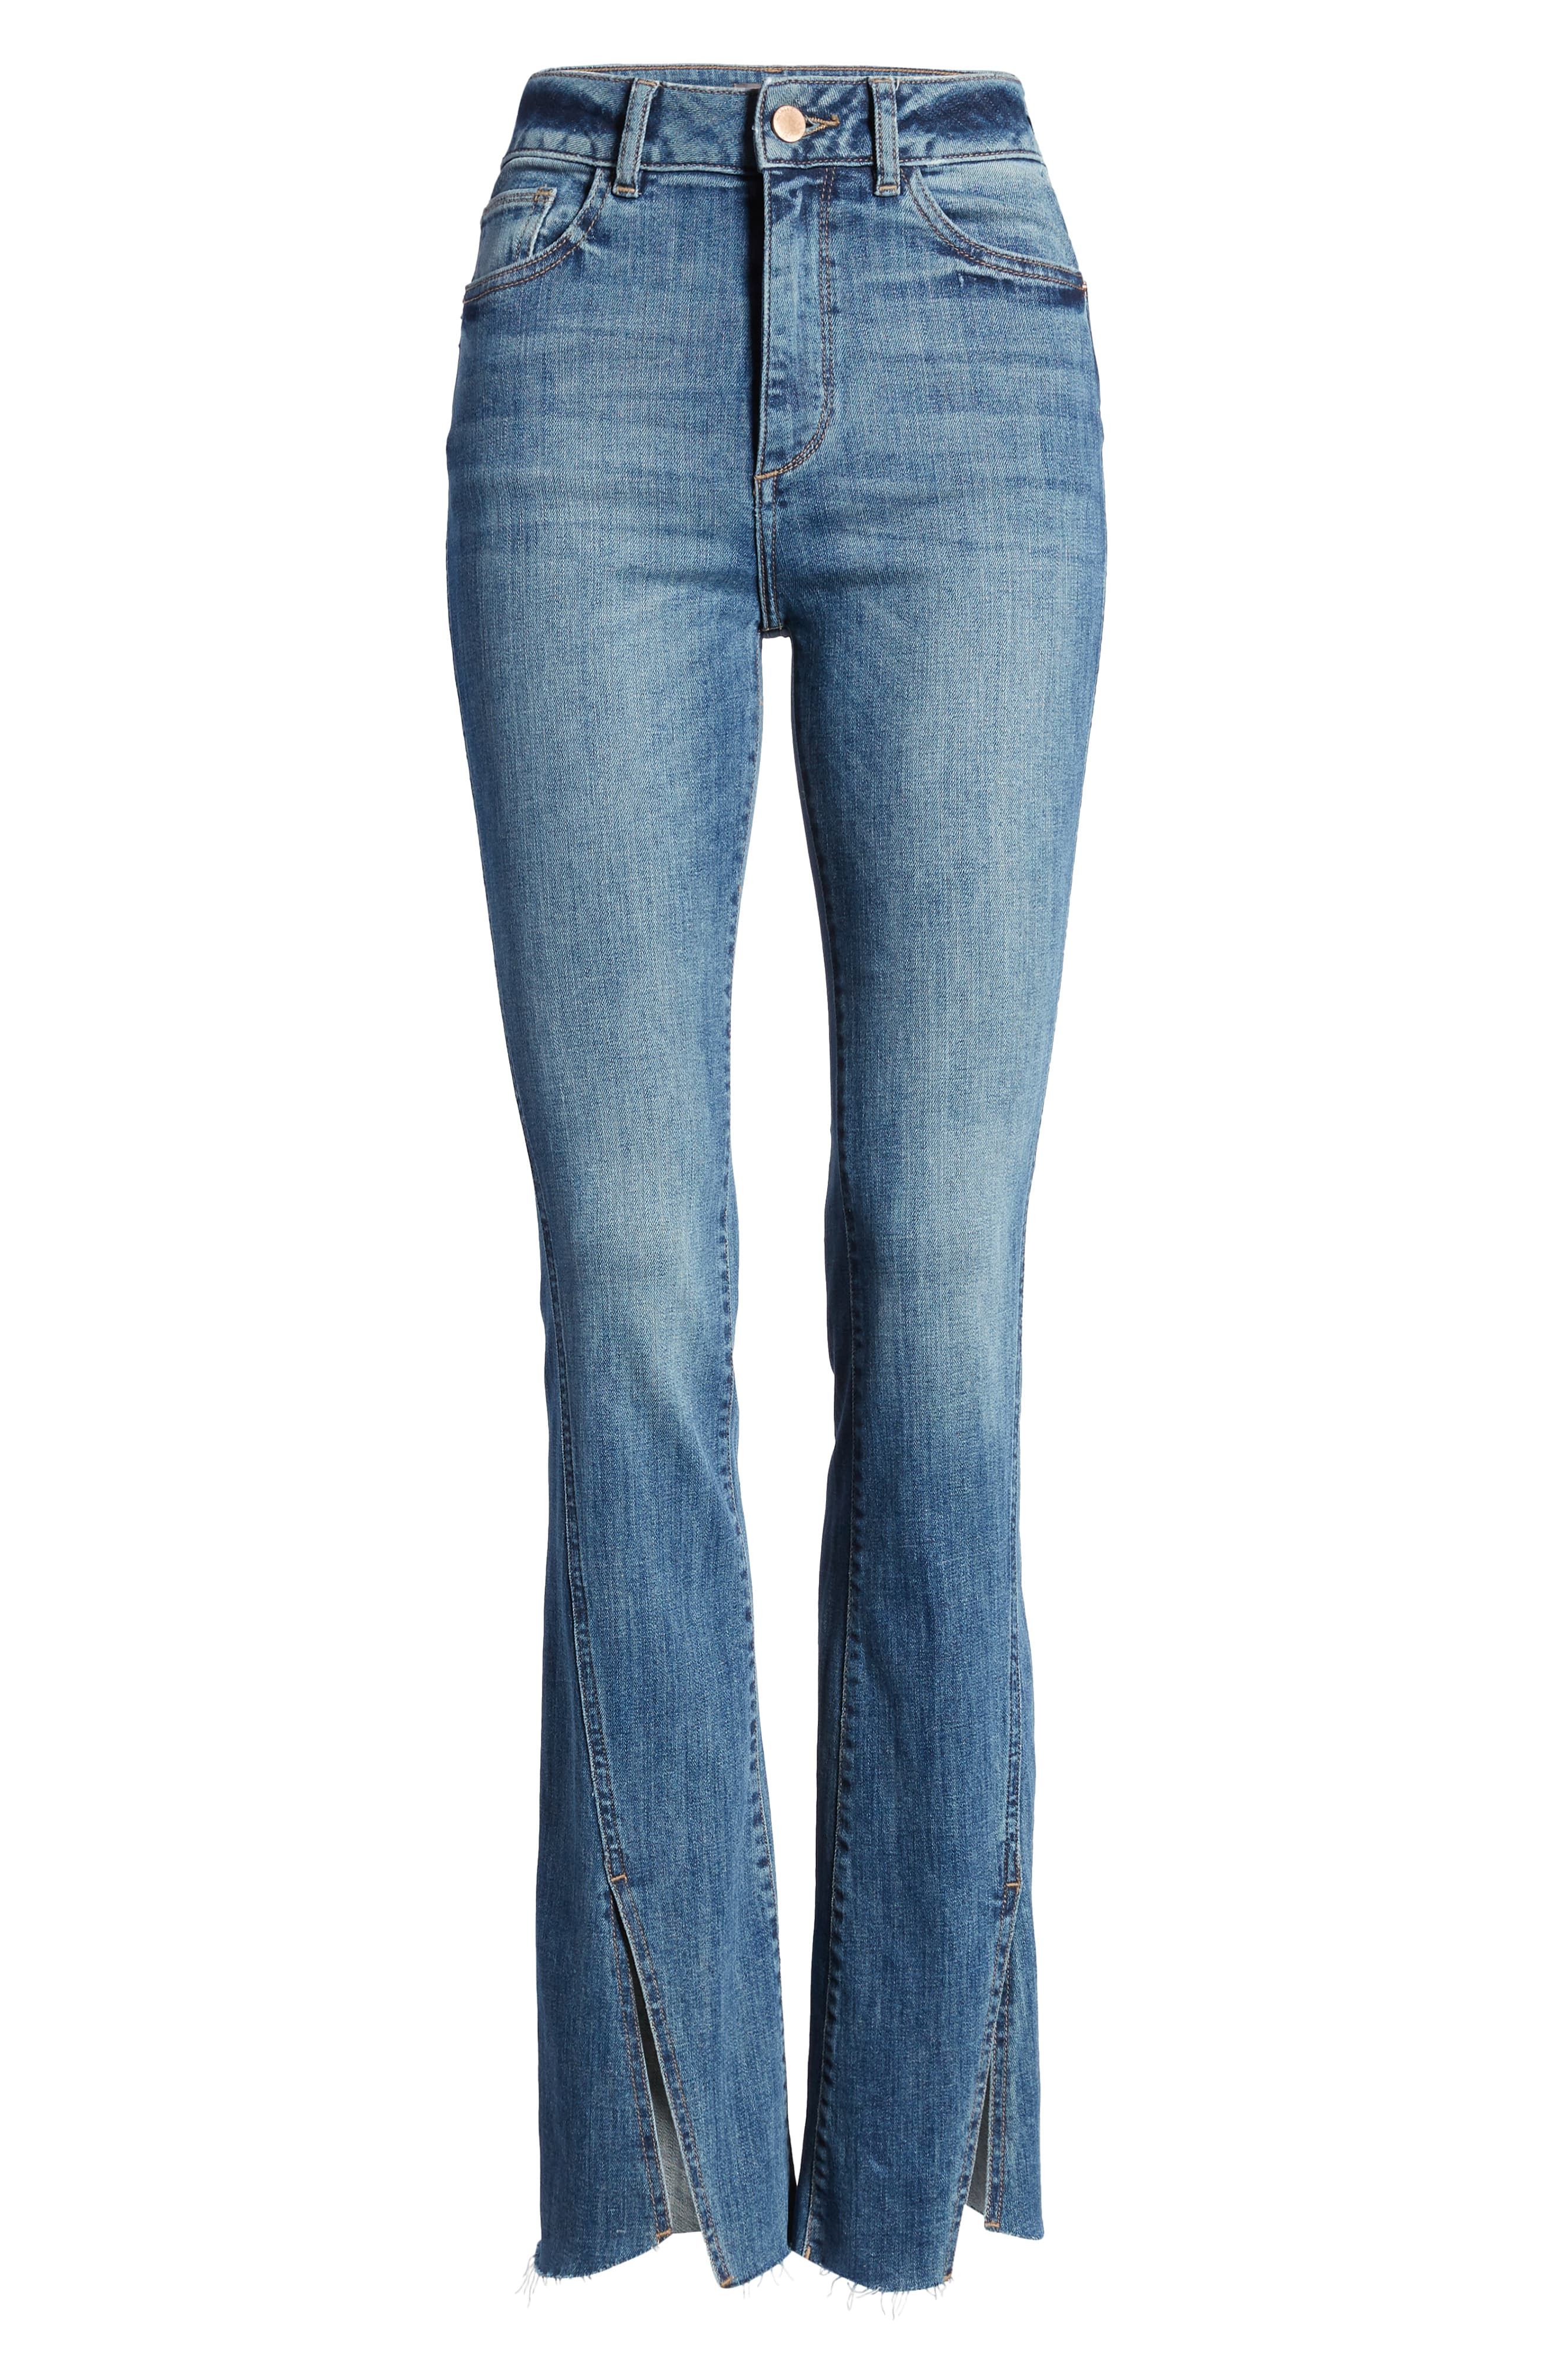 top brands for women jeans